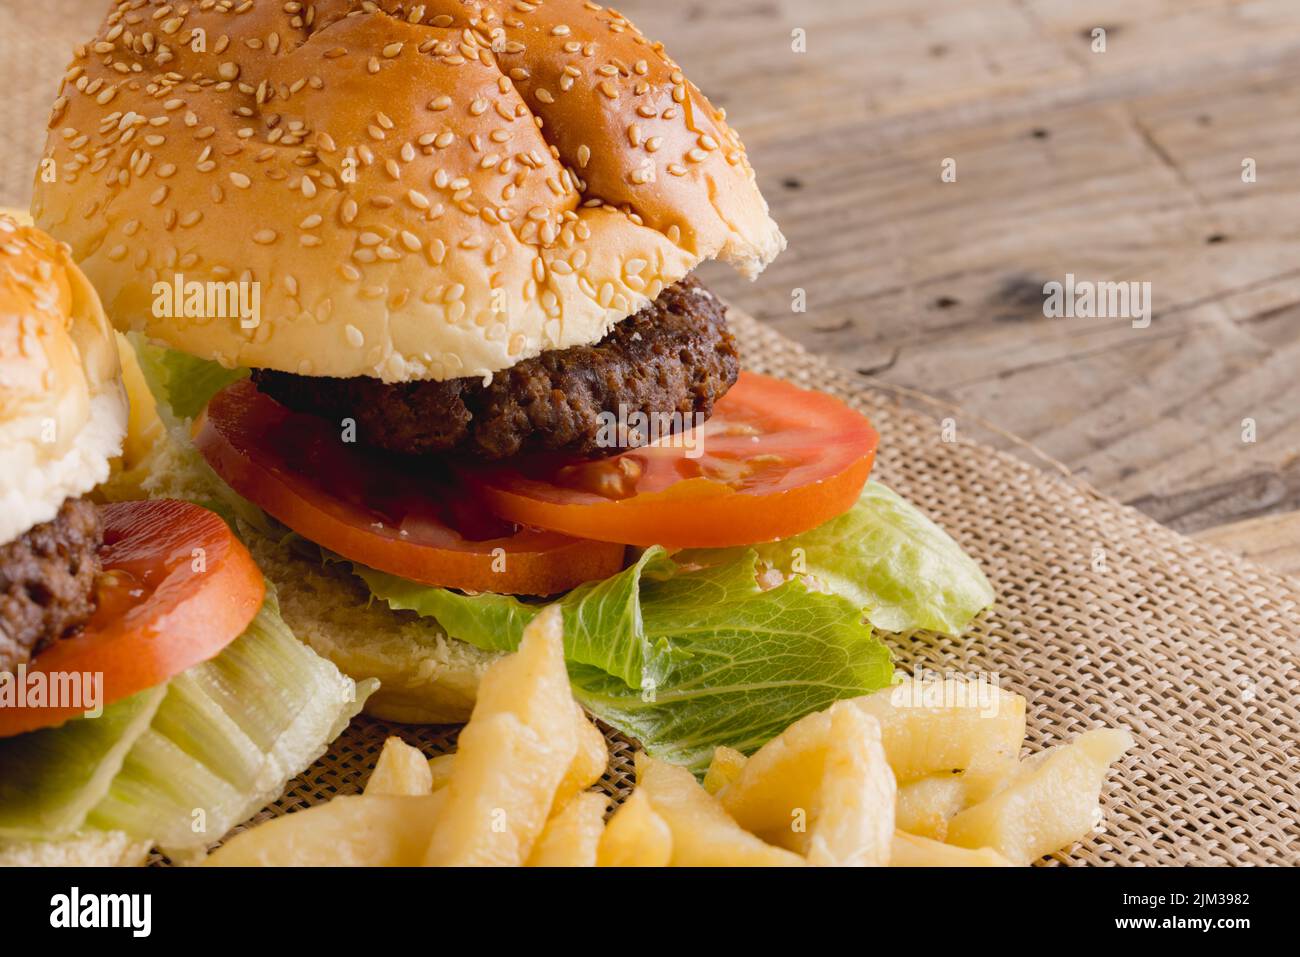 Close-up of burger and french fries, copy space. unaltered, food, snack, fast food and unhealthy food concept, Stock Photo